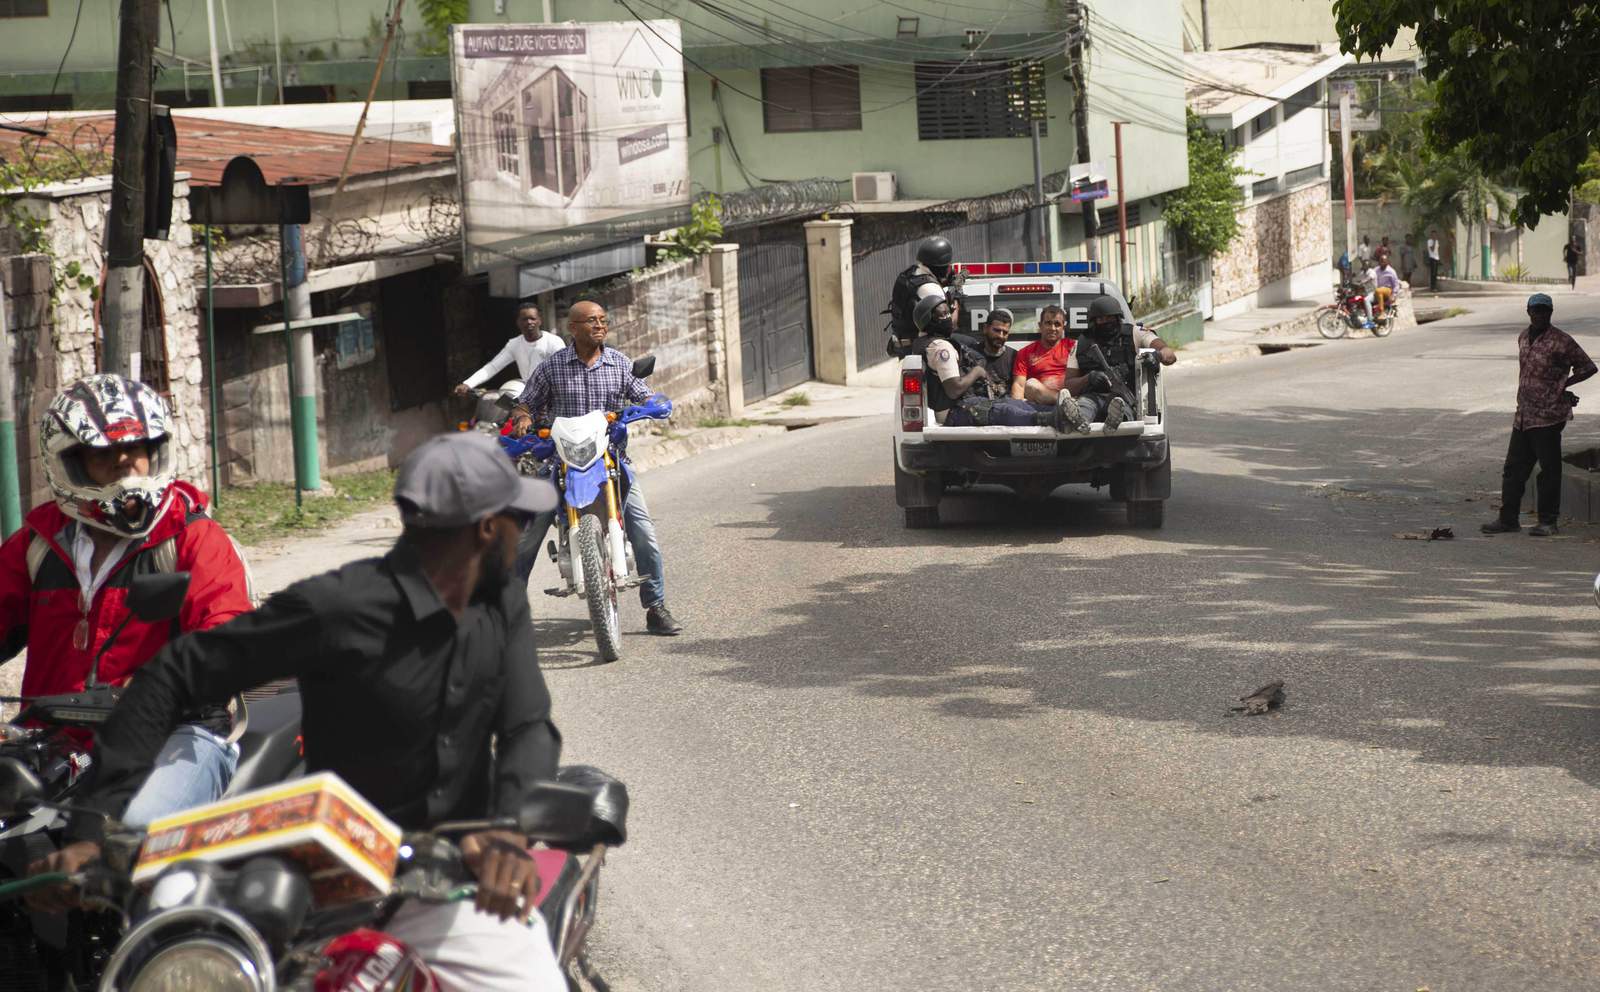 A police truck takes two detainees to the police station of Petion Ville in Port-au-Prince, Haiti, Thursday, July 8, 2021. According to Police Chief Leon Charles, the two detained are suspects in the assassination of Haitian President Jovenel Mose. (AP Photo/Joseph Odelyn)